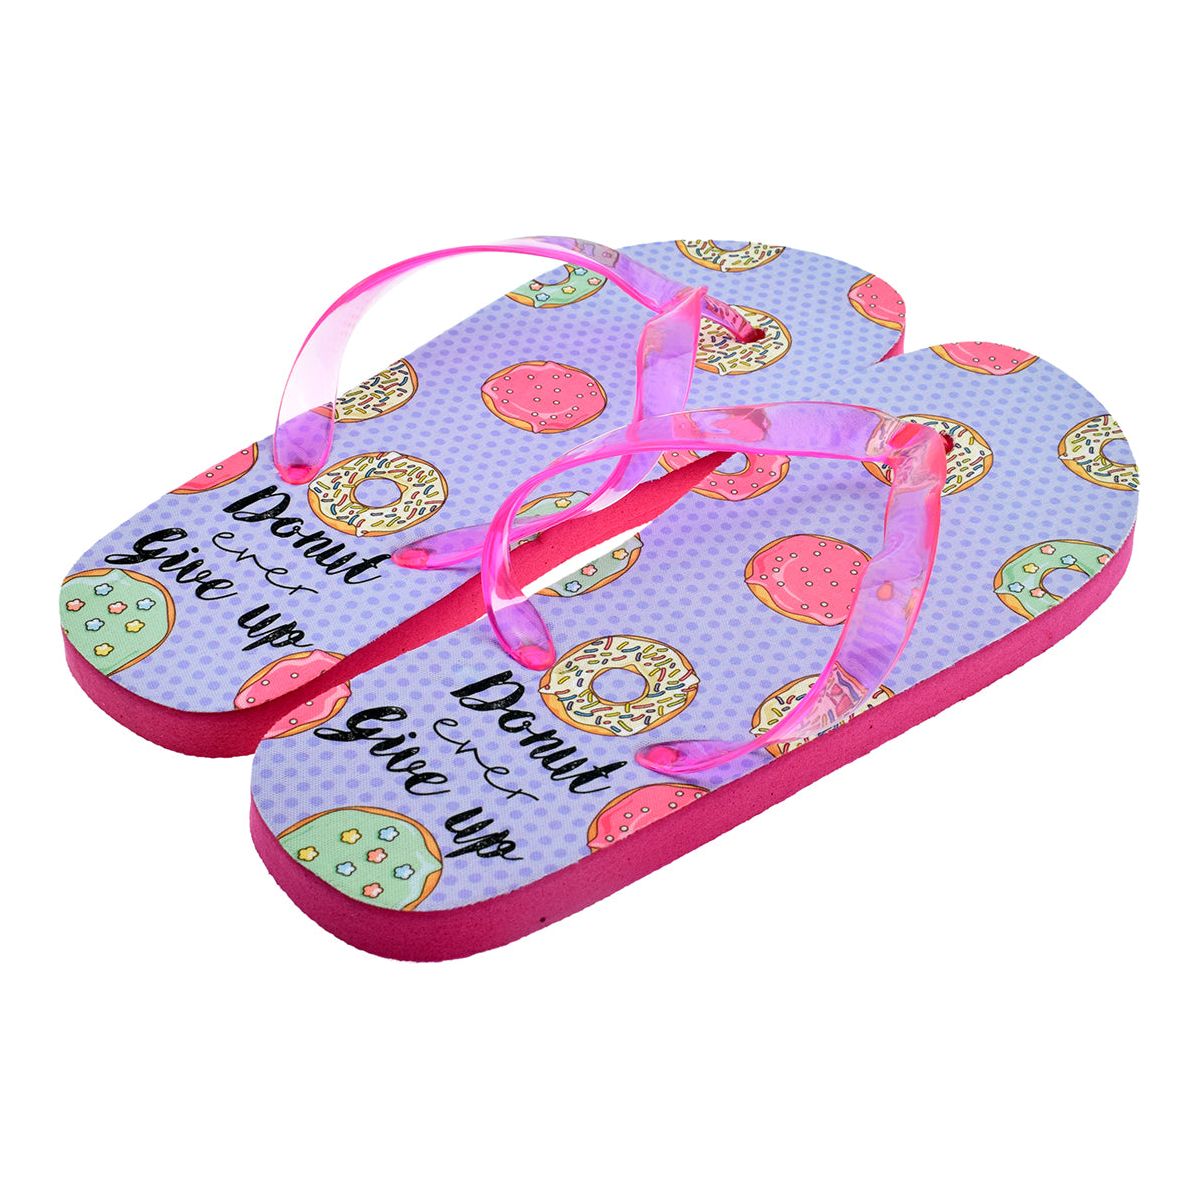 Ladies Donut Give up Comedy Flip Flops - Ashton and Finch